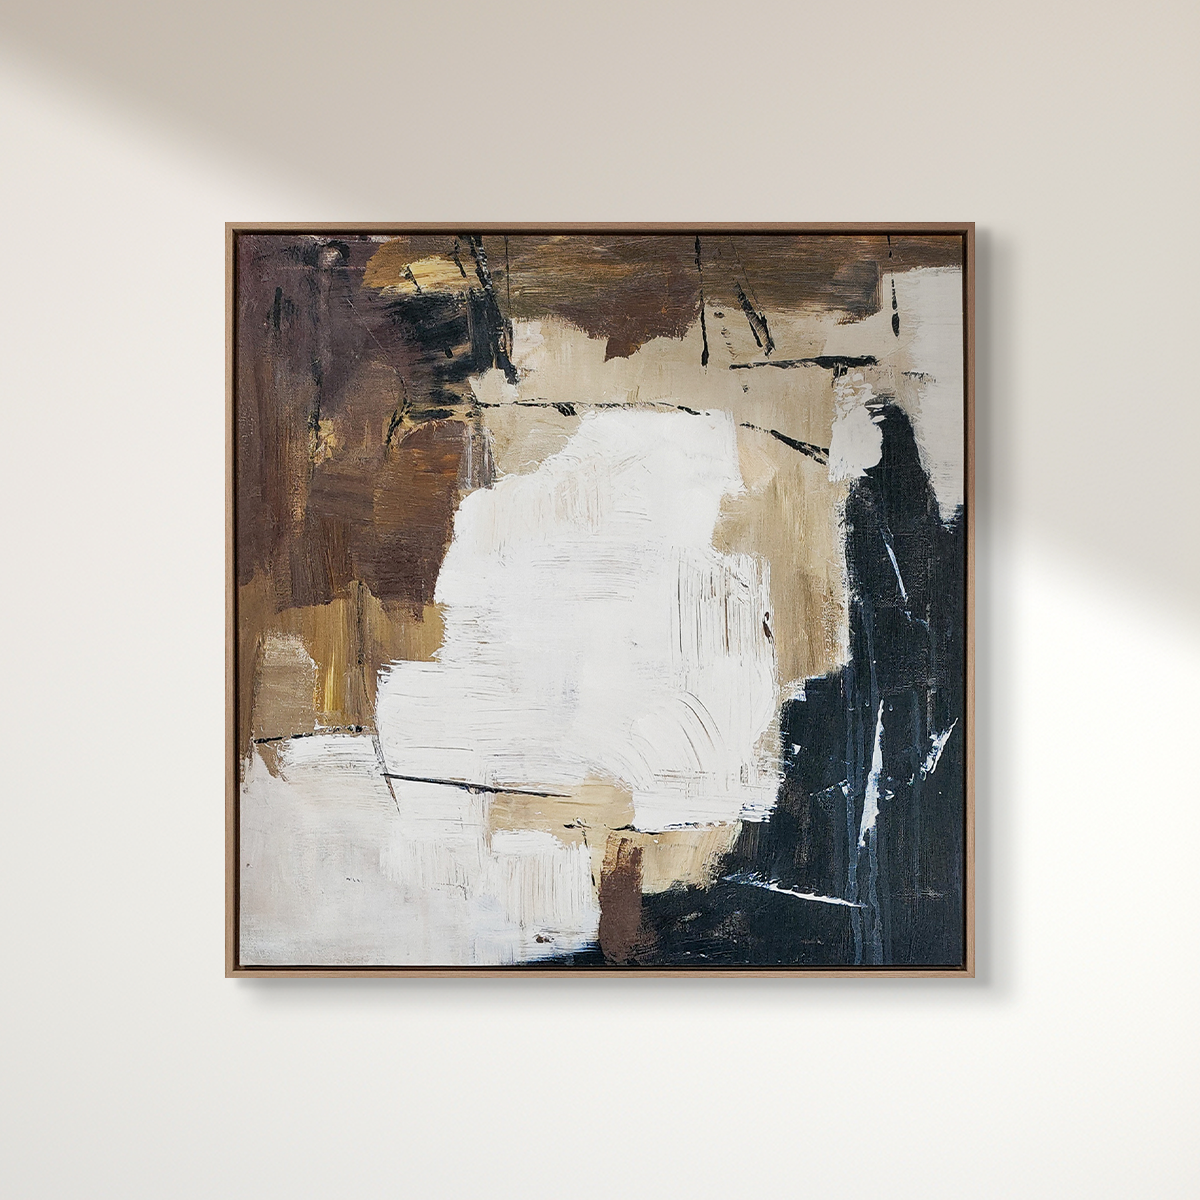 Abstract textured wall art affordable oil painting unframed brown square on wooden frame